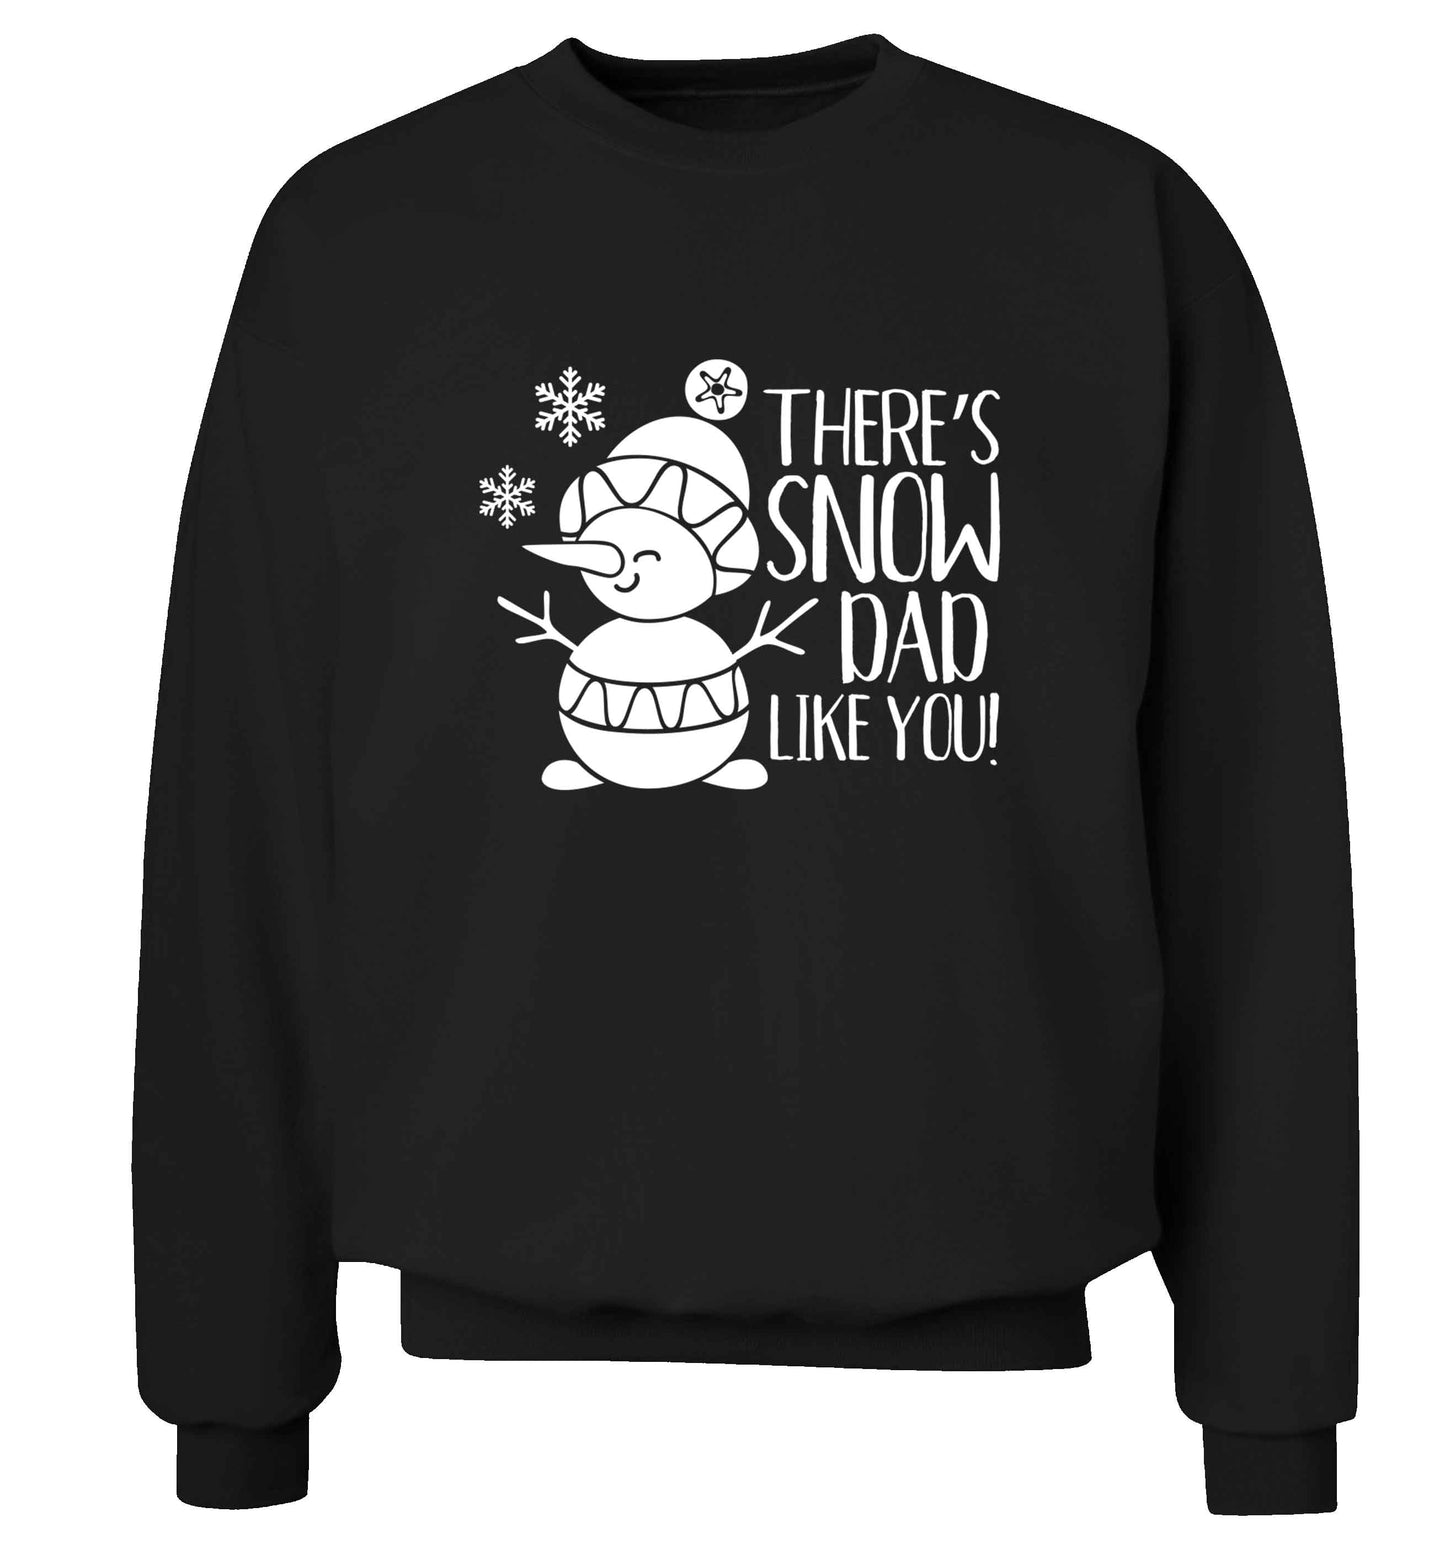 There's snow dad like you adult's unisex black sweater 2XL